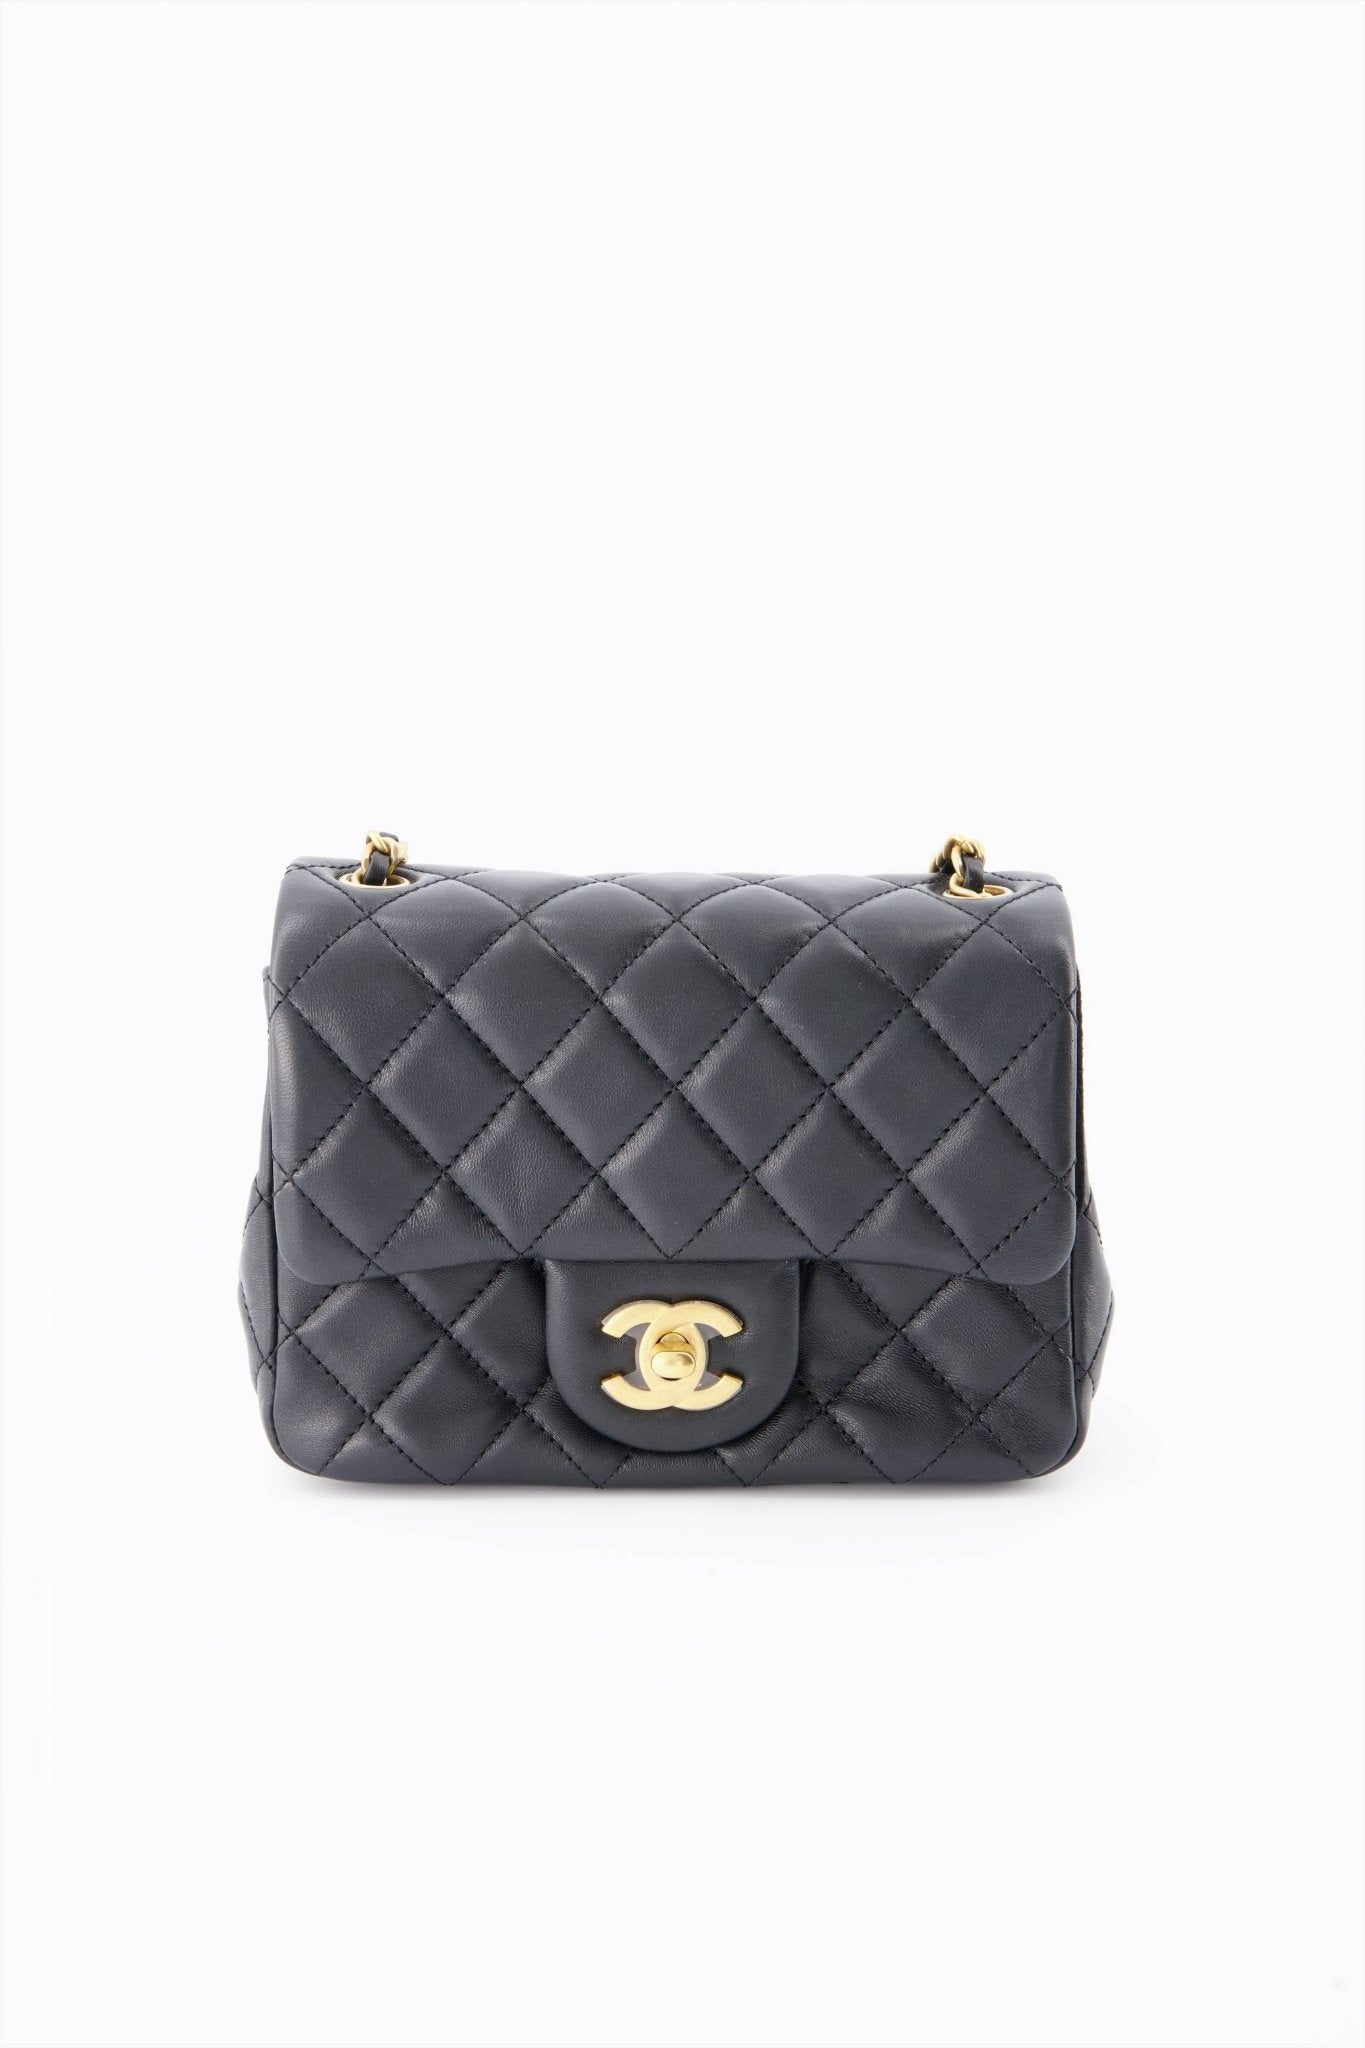 Chanel Black Quilted Lambskin Classic Mini Flap Bag Gold Hardware